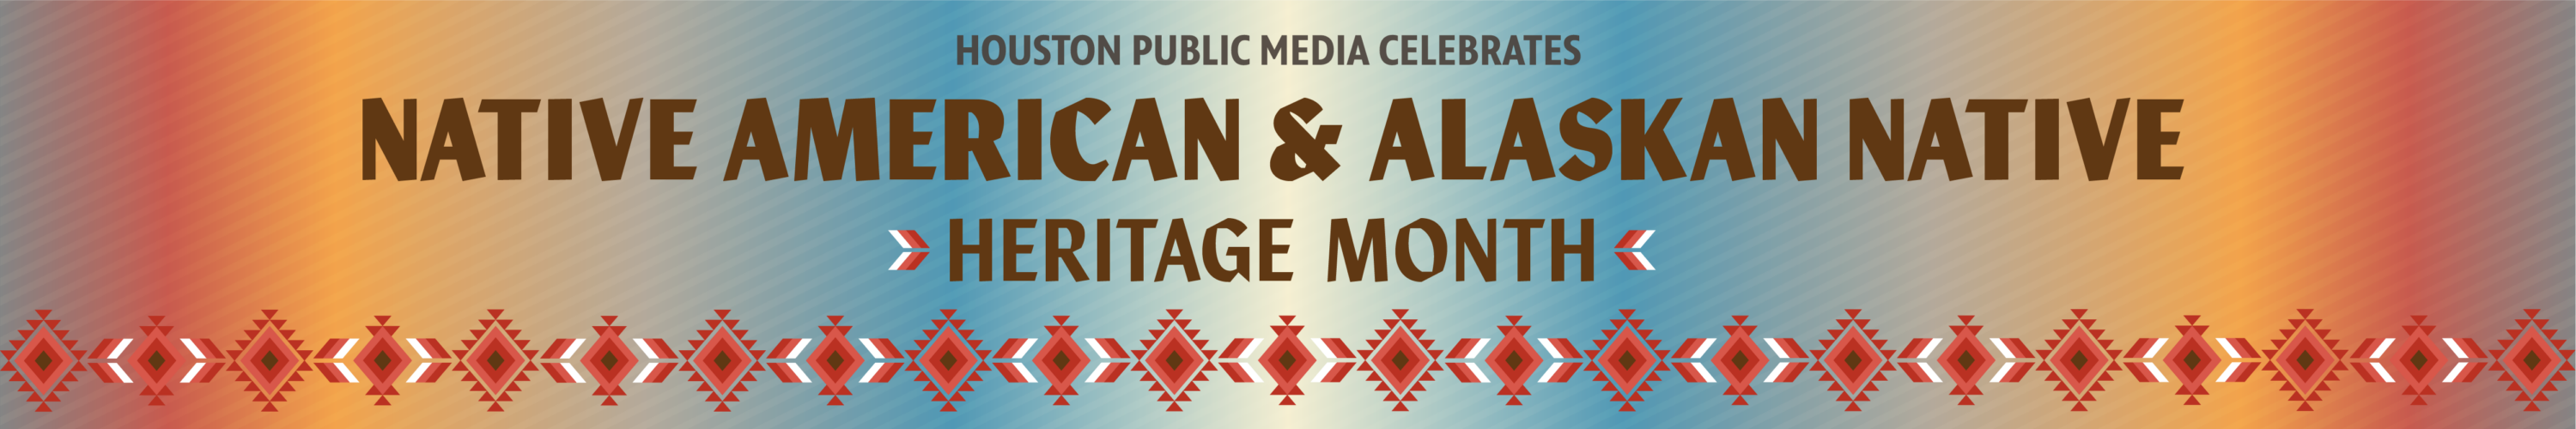 Native American and Alaskan Native Heritage Month page banner